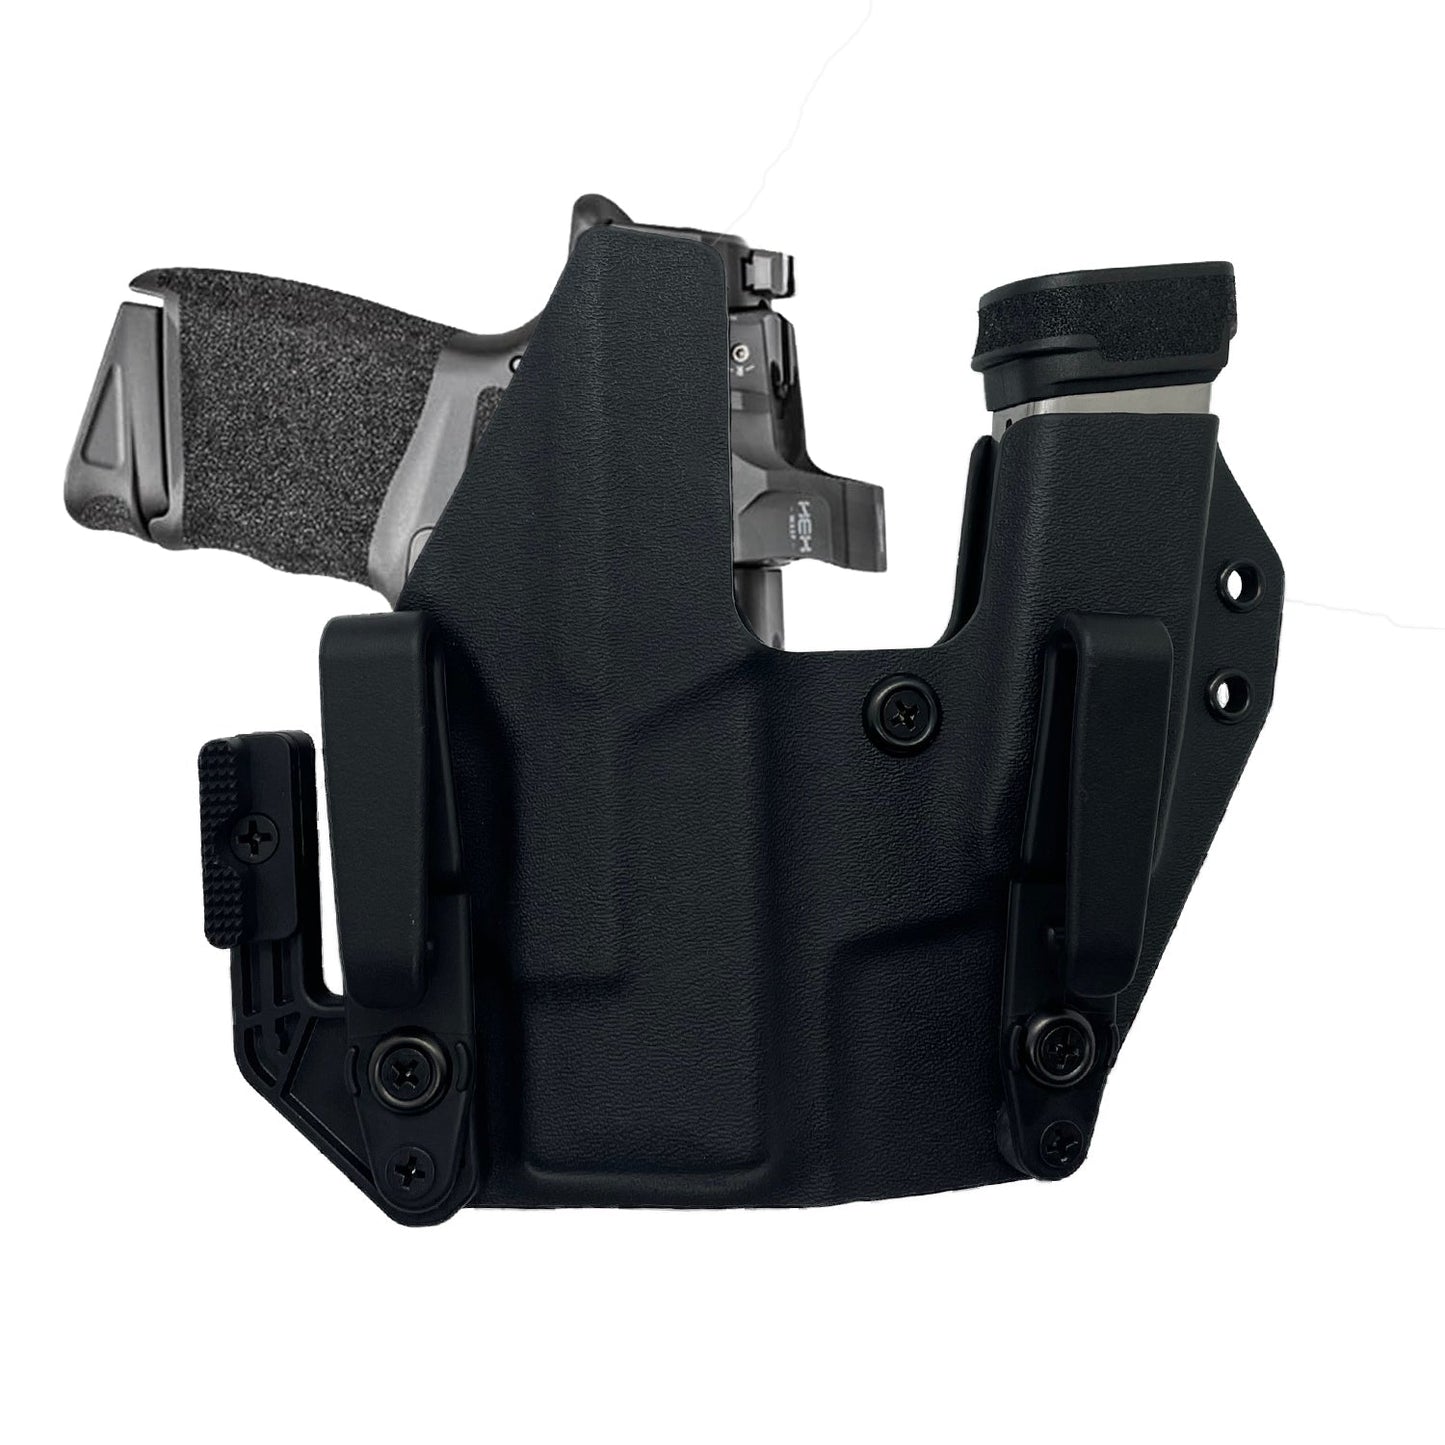 Springfield Hellcat PRO With TLR7-SUB Light RMR Cut Gun and Magazine Combo Holster